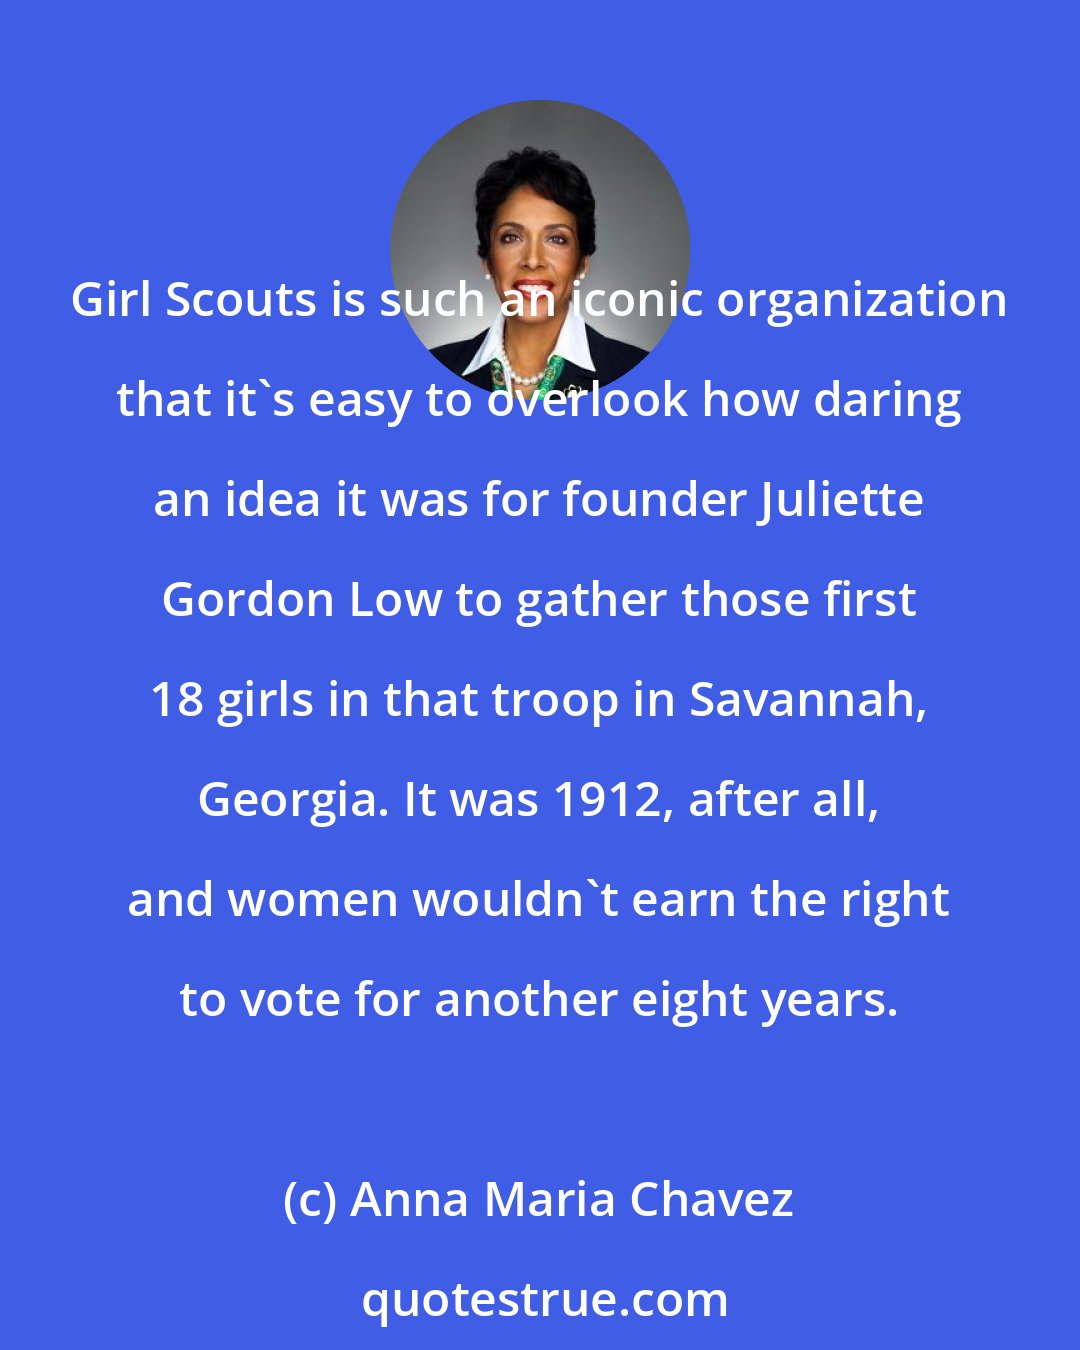 Anna Maria Chavez: Girl Scouts is such an iconic organization that it's easy to overlook how daring an idea it was for founder Juliette Gordon Low to gather those first 18 girls in that troop in Savannah, Georgia. It was 1912, after all, and women wouldn't earn the right to vote for another eight years.